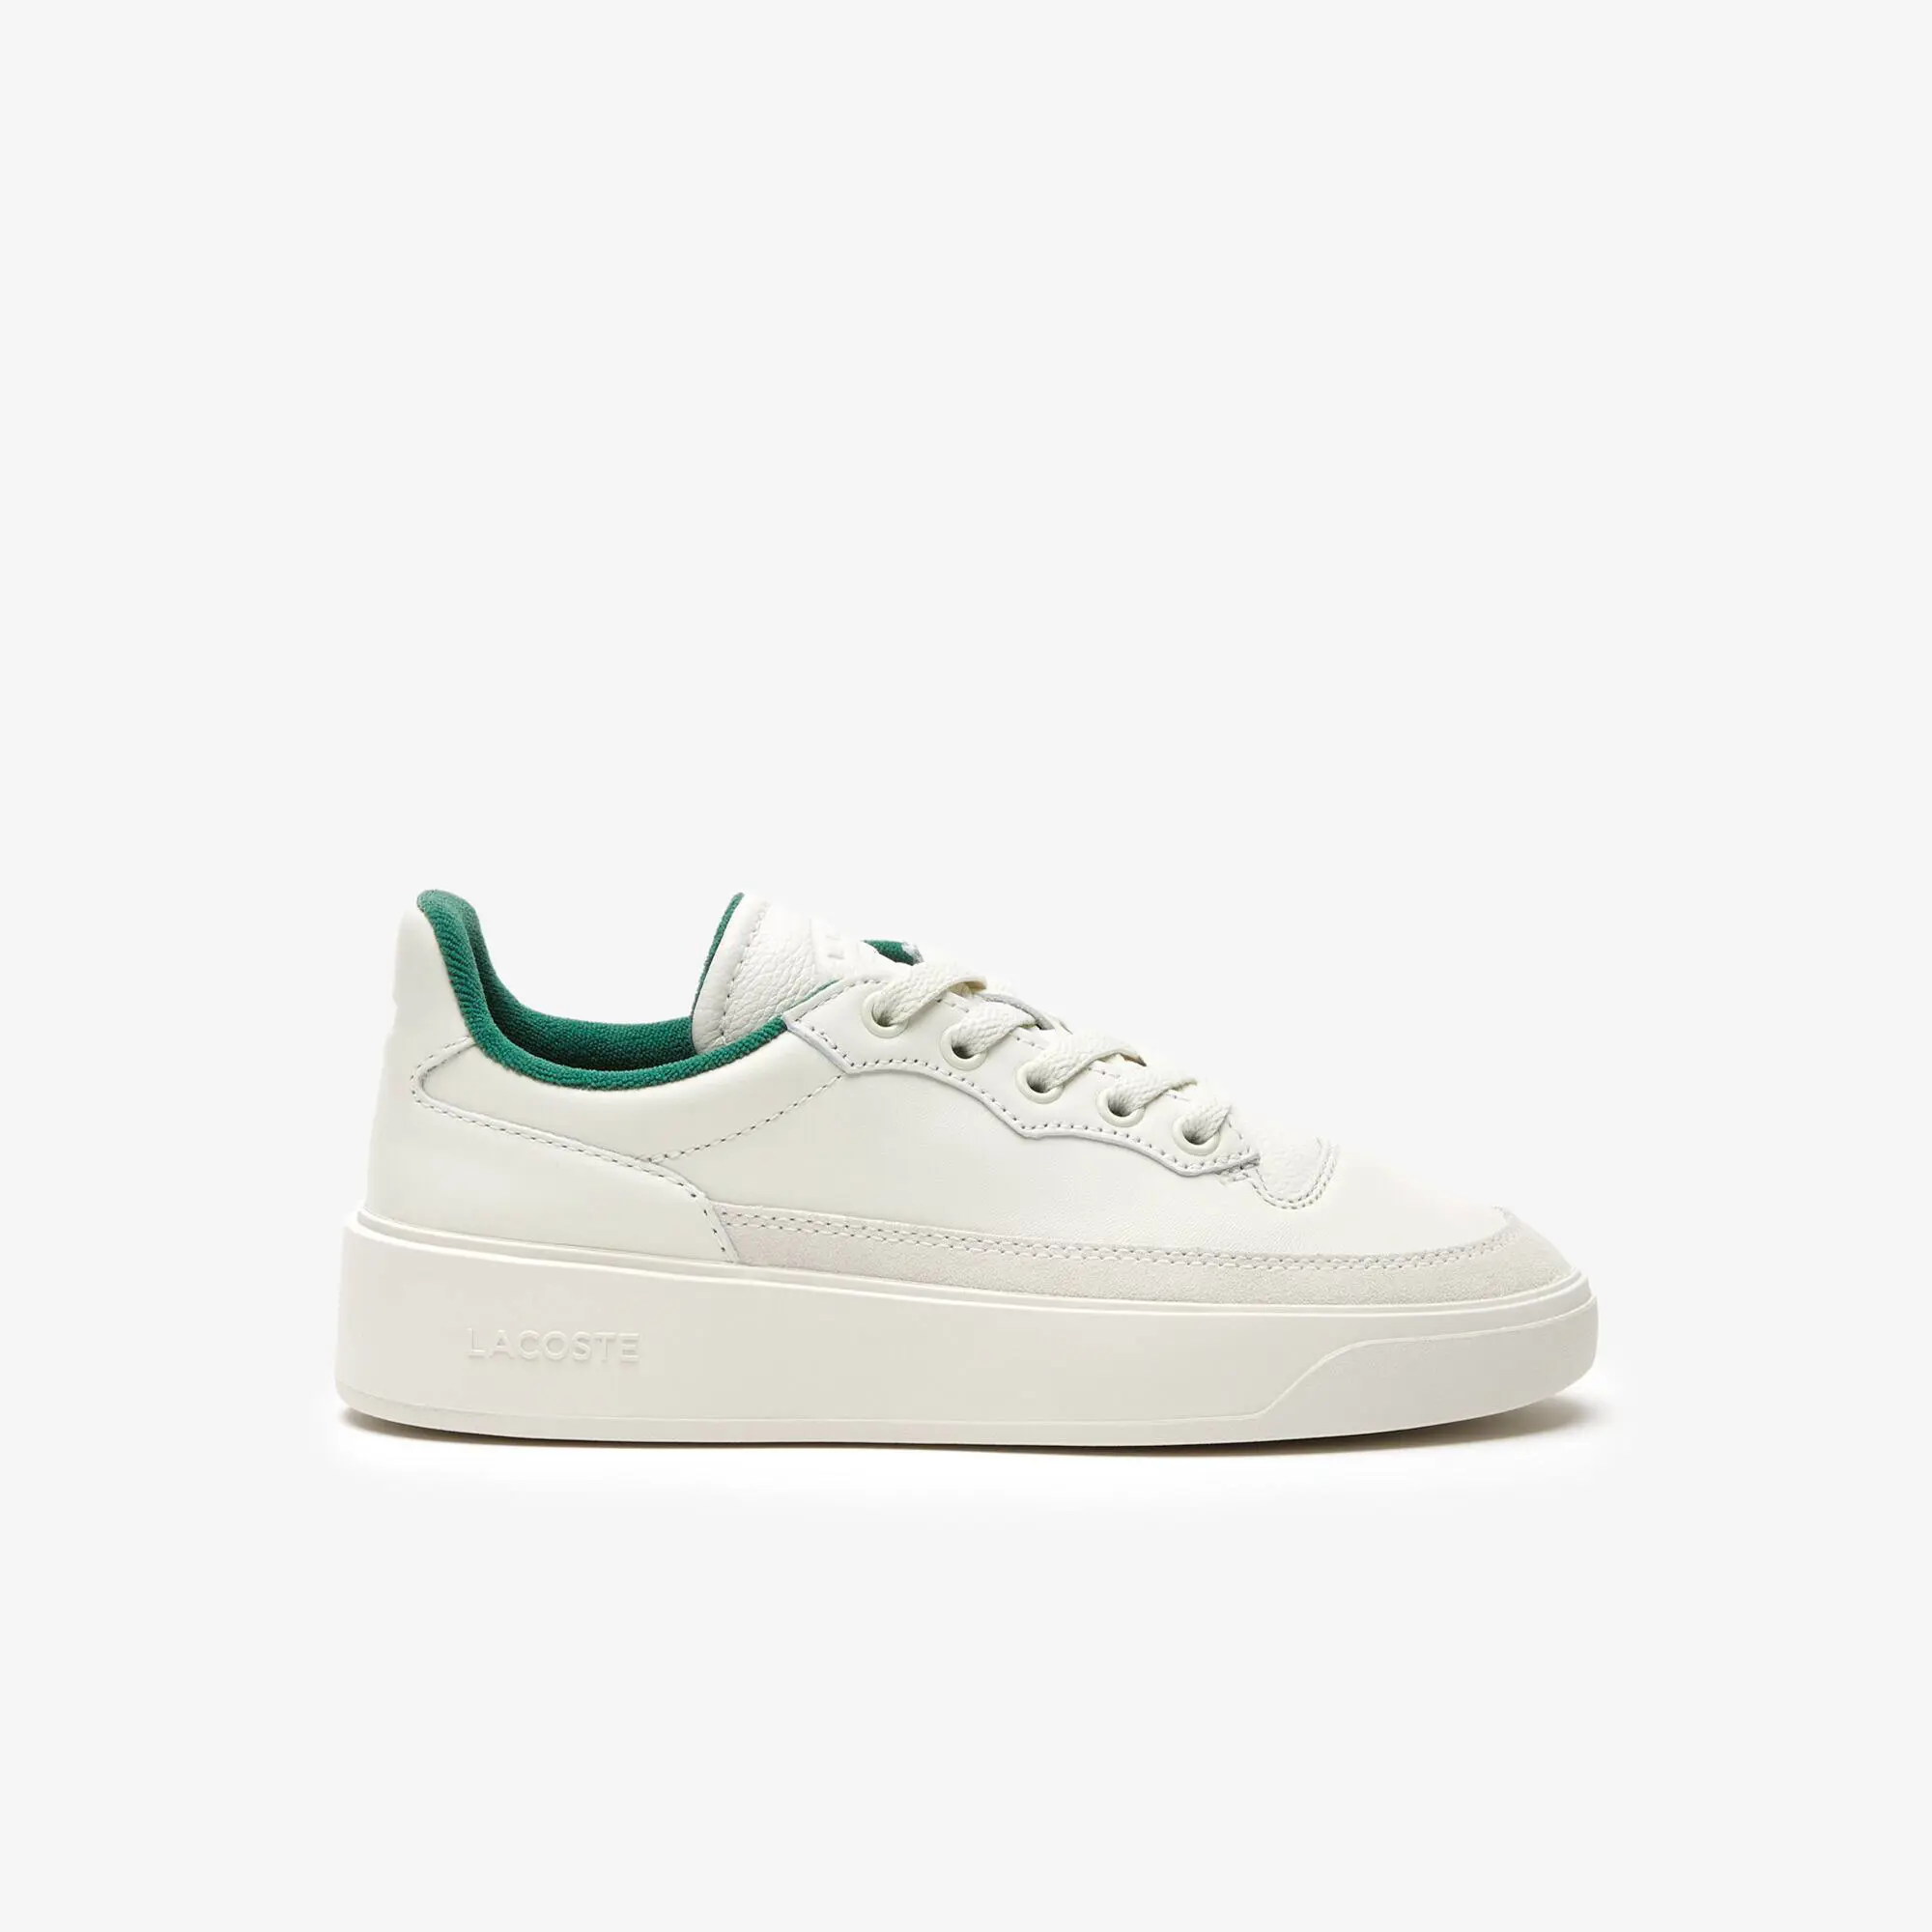 Lacoste Women's Lacoste G80 Club Leather Tonal Trainers. 1